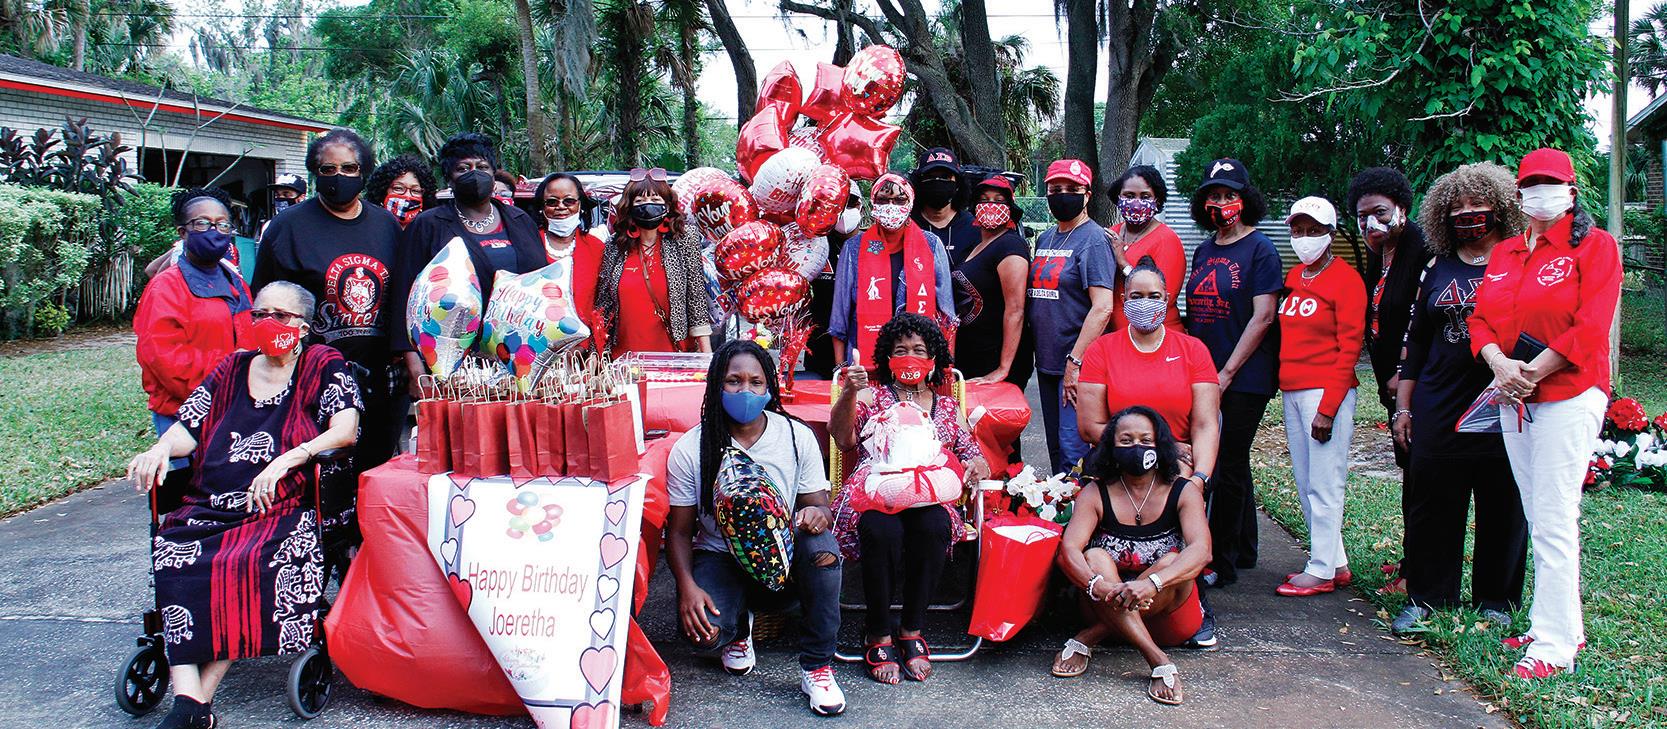 Joeretha Hayes (seated in the center) is shown on March 29 with her sorors of the Daytona Beach Alumnae Chapter of Delta Sigma Theta Sorority, Inc. (Photo: DUANE C. FERNANDEZ SR./HARDNOTTSPHOTOGRAPHY.COM)